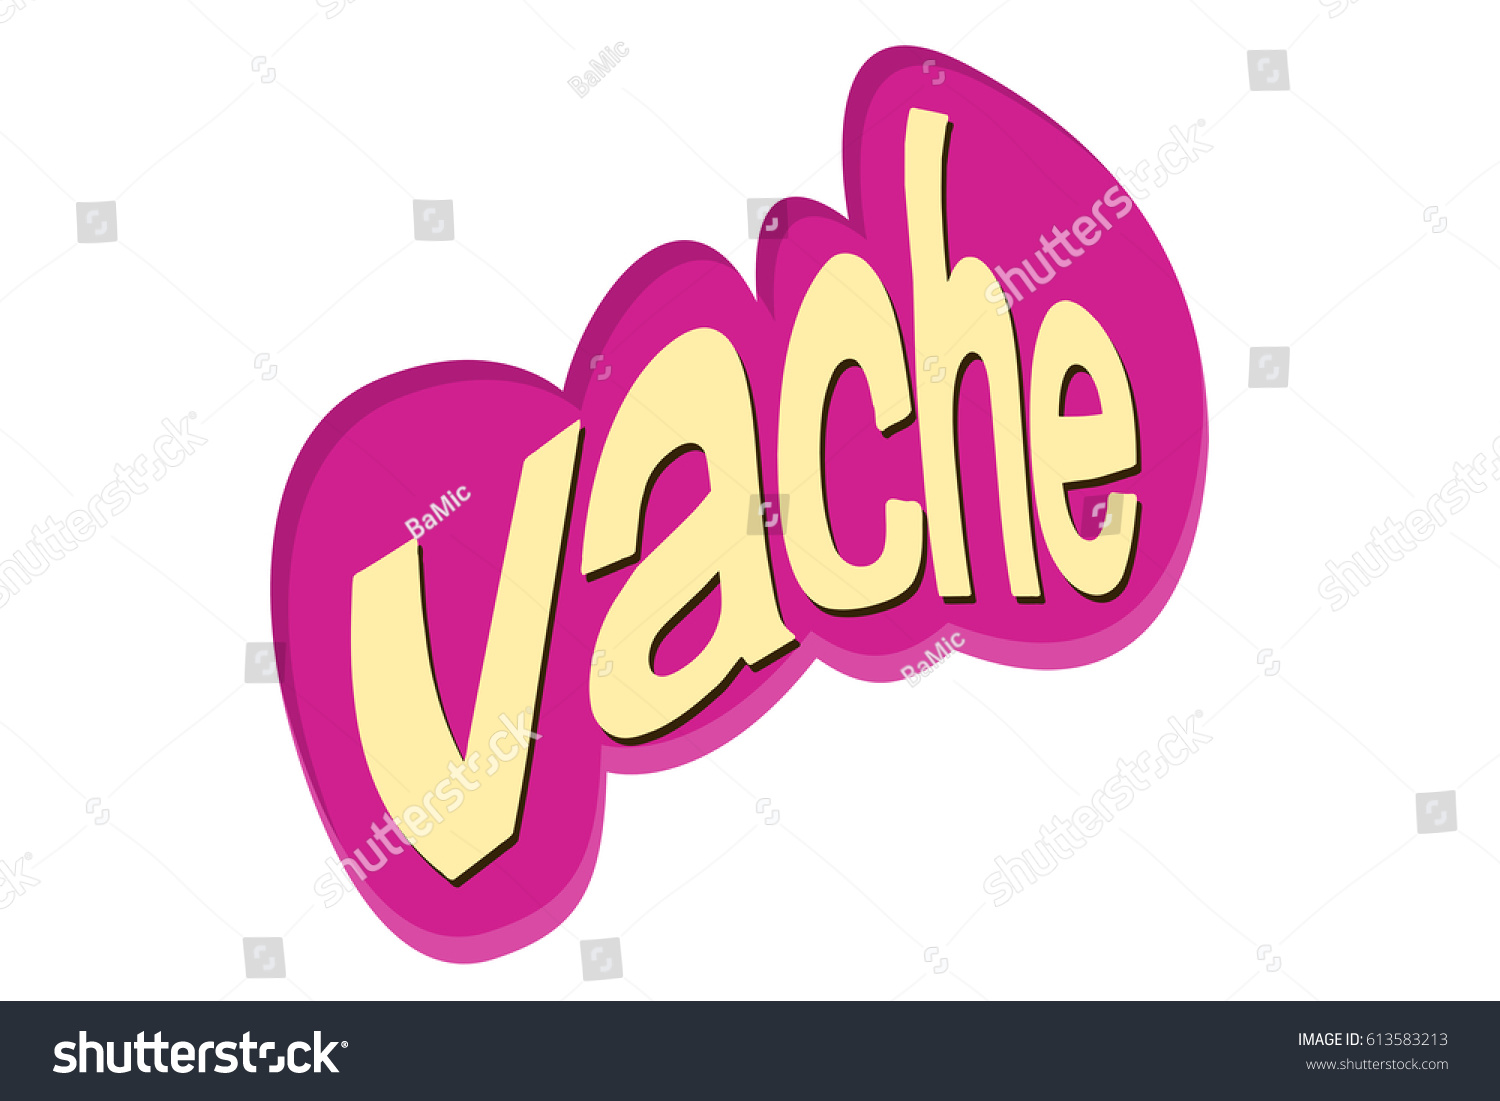 Stock Photo Cow In French Funny Letters 613583213 